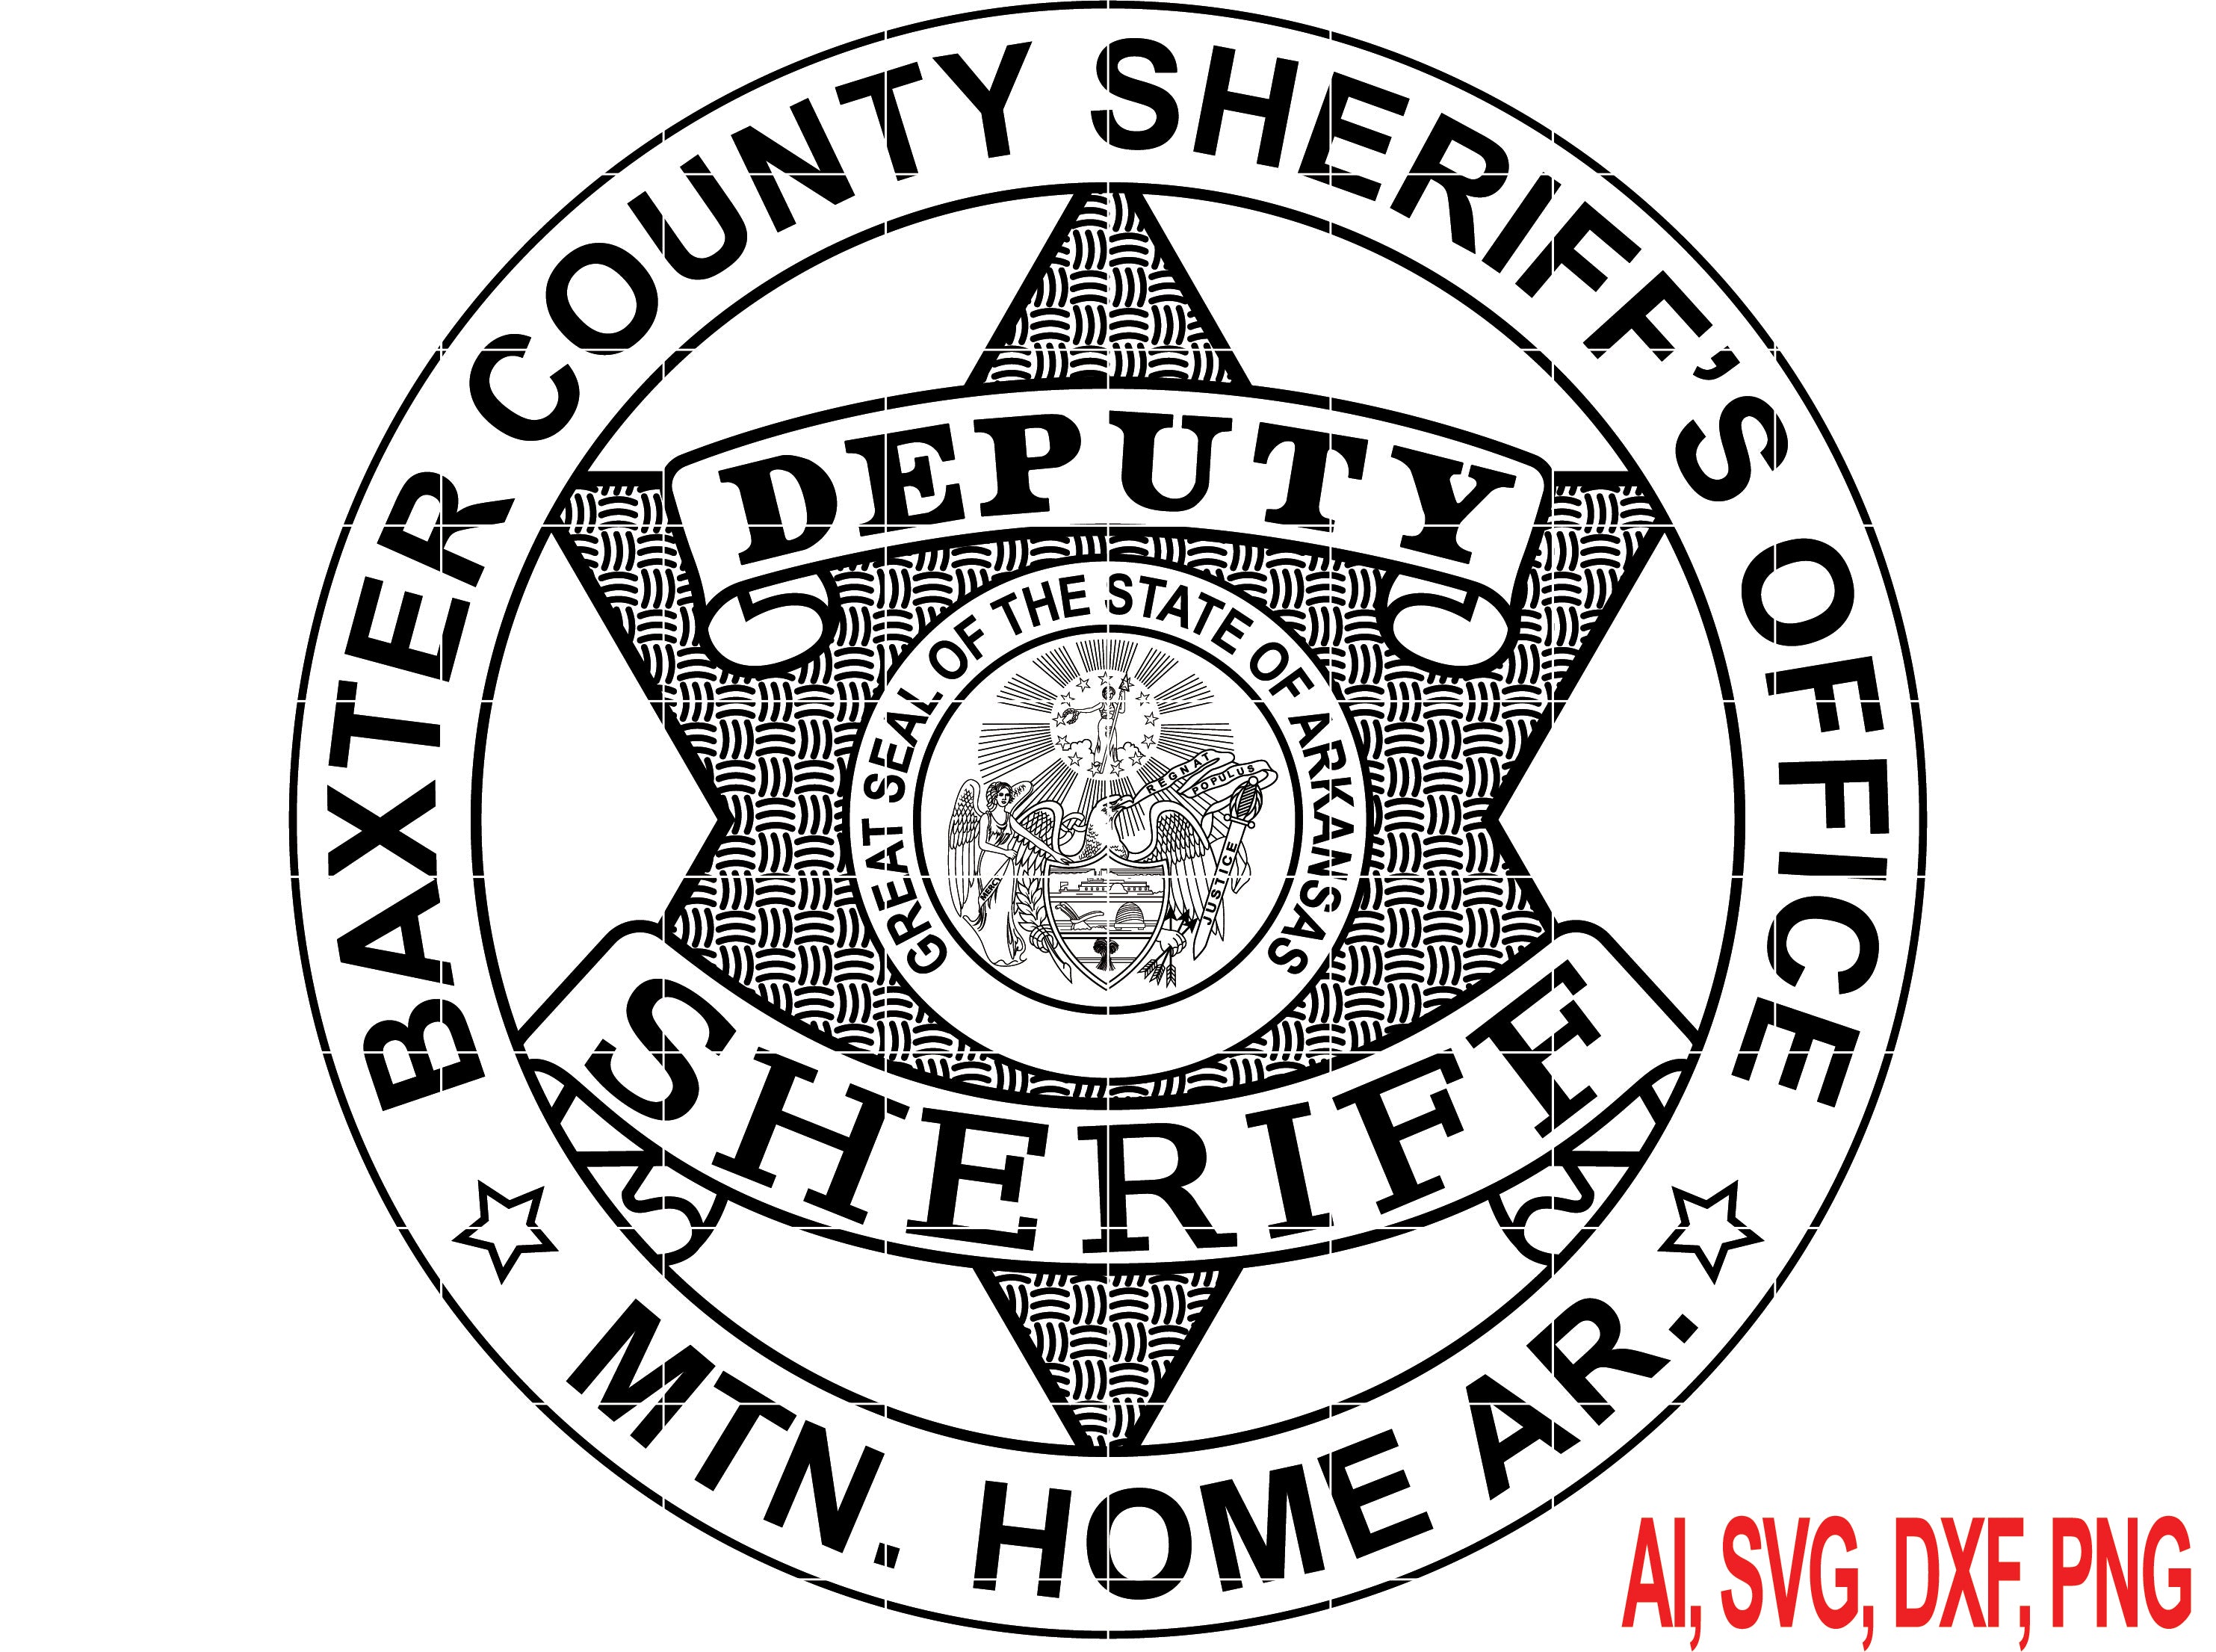 Baxter County Sheriff Badge Vector art Svg,Dxf,Jpg,Png & Ai files for Engraving and Printing